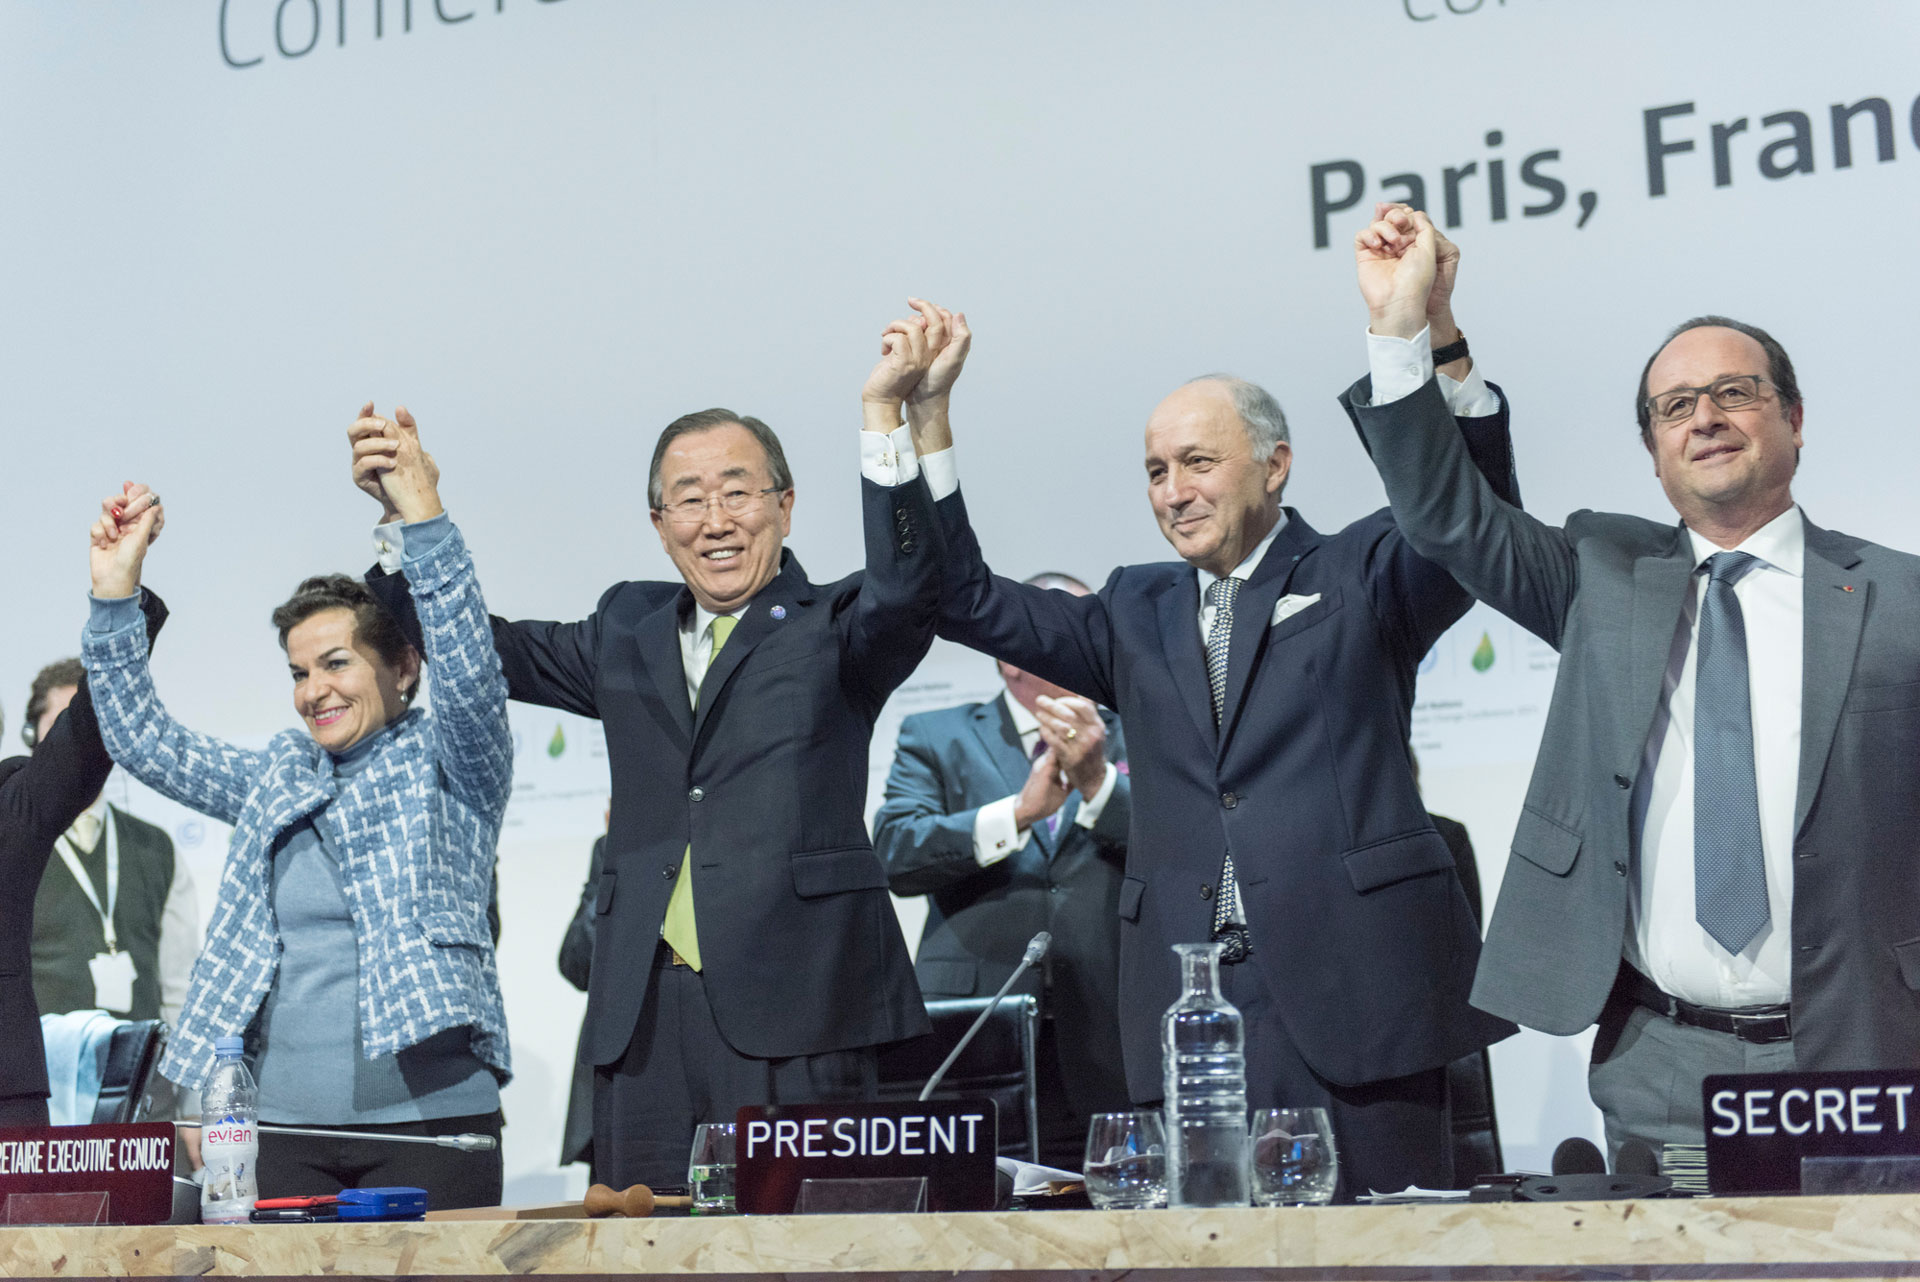 <p><sub>Former Secretary-General Ban Ki-moon (second left); Christiana Figueres (left), Executive Secretary of the UN Framework Convention on Climate Change (UNFCCC); Laurent Fabius (second right), Minister for Foreign Affairs of France and President of the UN Climate Change Conference in Paris (COP21) and François Hollande (right), President of France celebrate after the historic adoption of Paris Agreement on climate change.</sub></p>